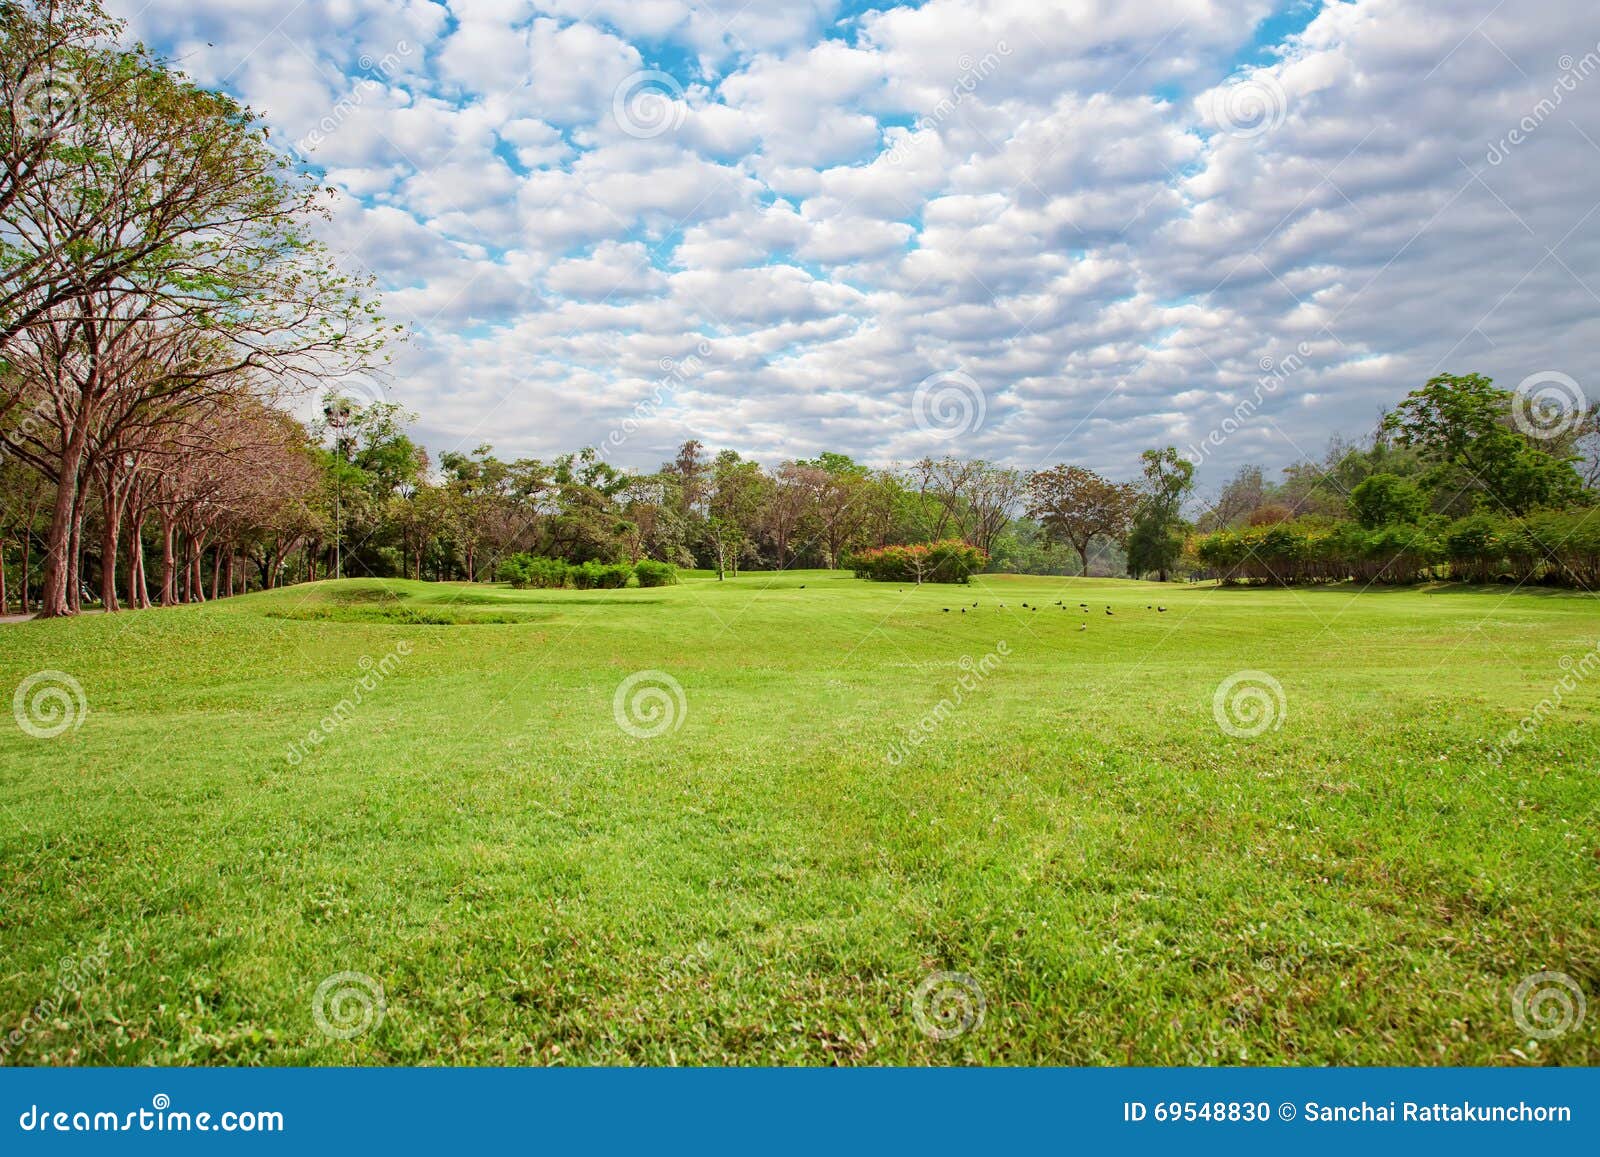 Image of a Big Pot With Design In a Lawn Of a Park-PE825562-Picxy